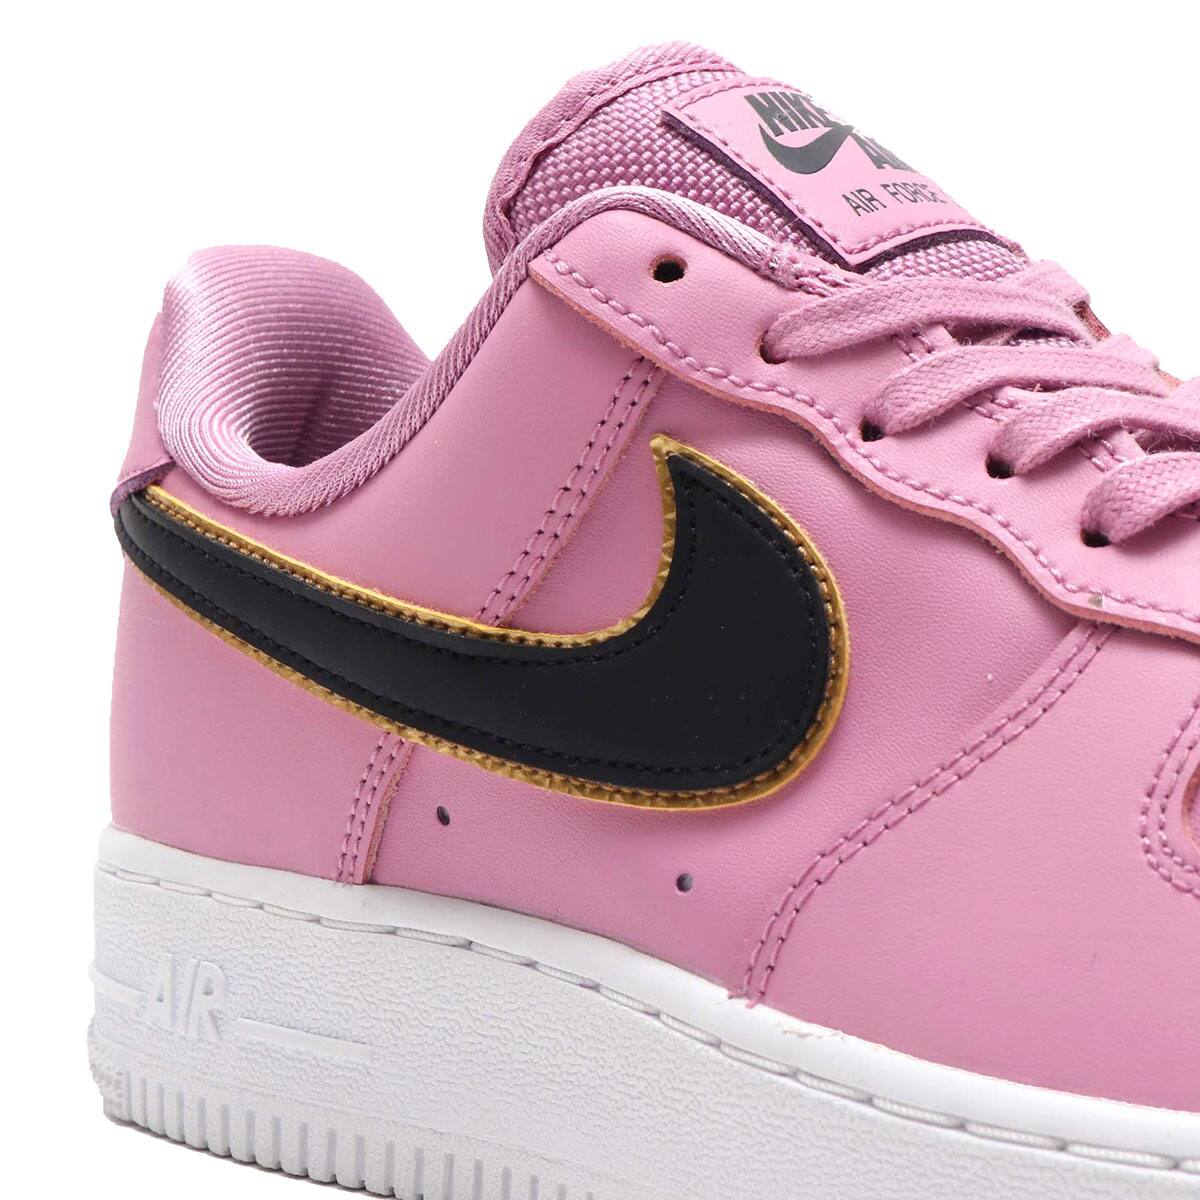 NIKE WMNS AIR FORCE 1 '07 ESS FROSTED PLUM/BLACK-FROSTED PLUM 20SP-I